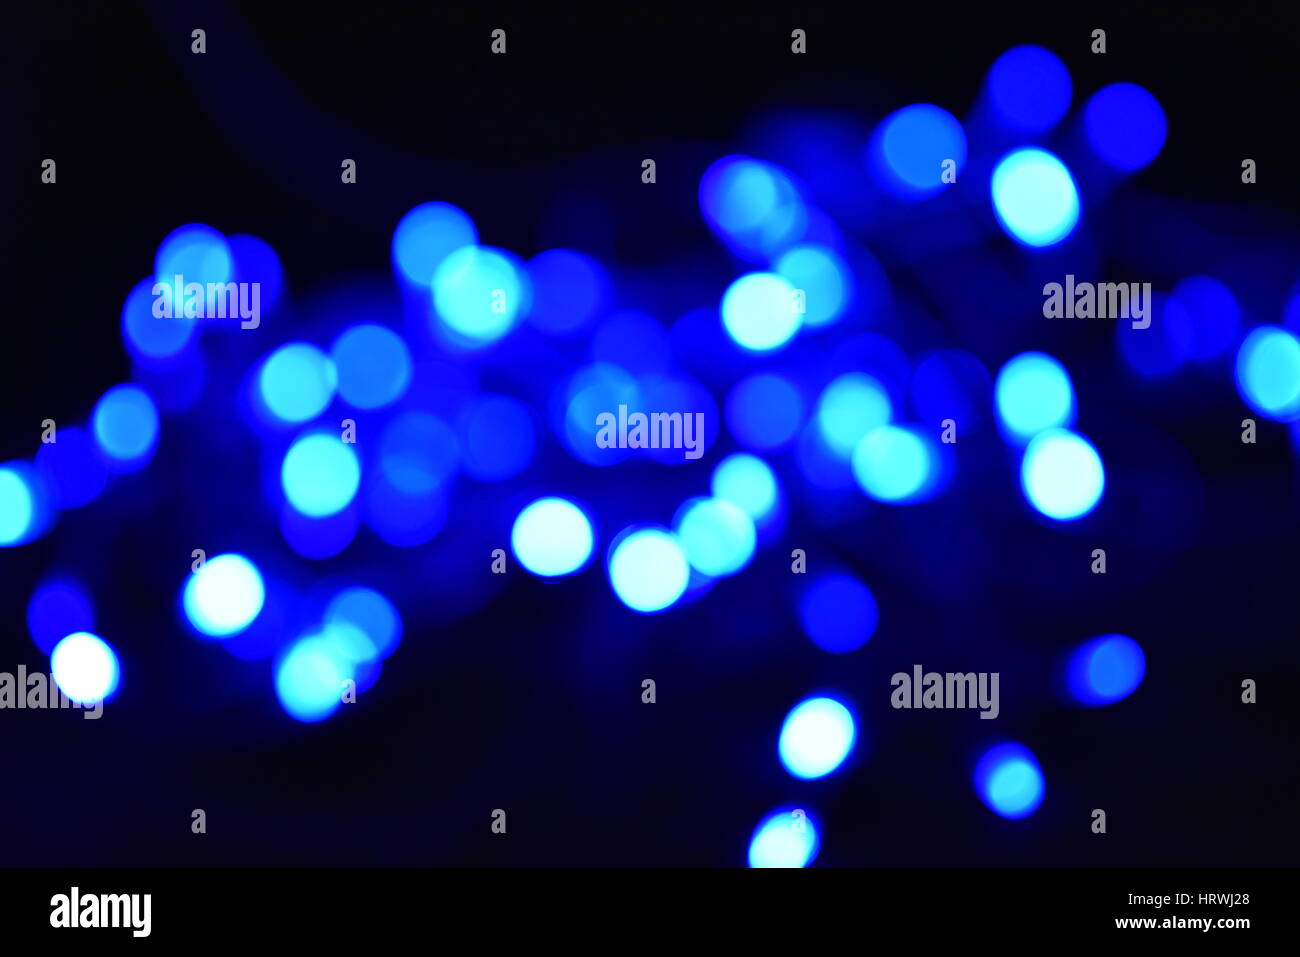 Blue and white blurred bokeh lights background. Stock Photo